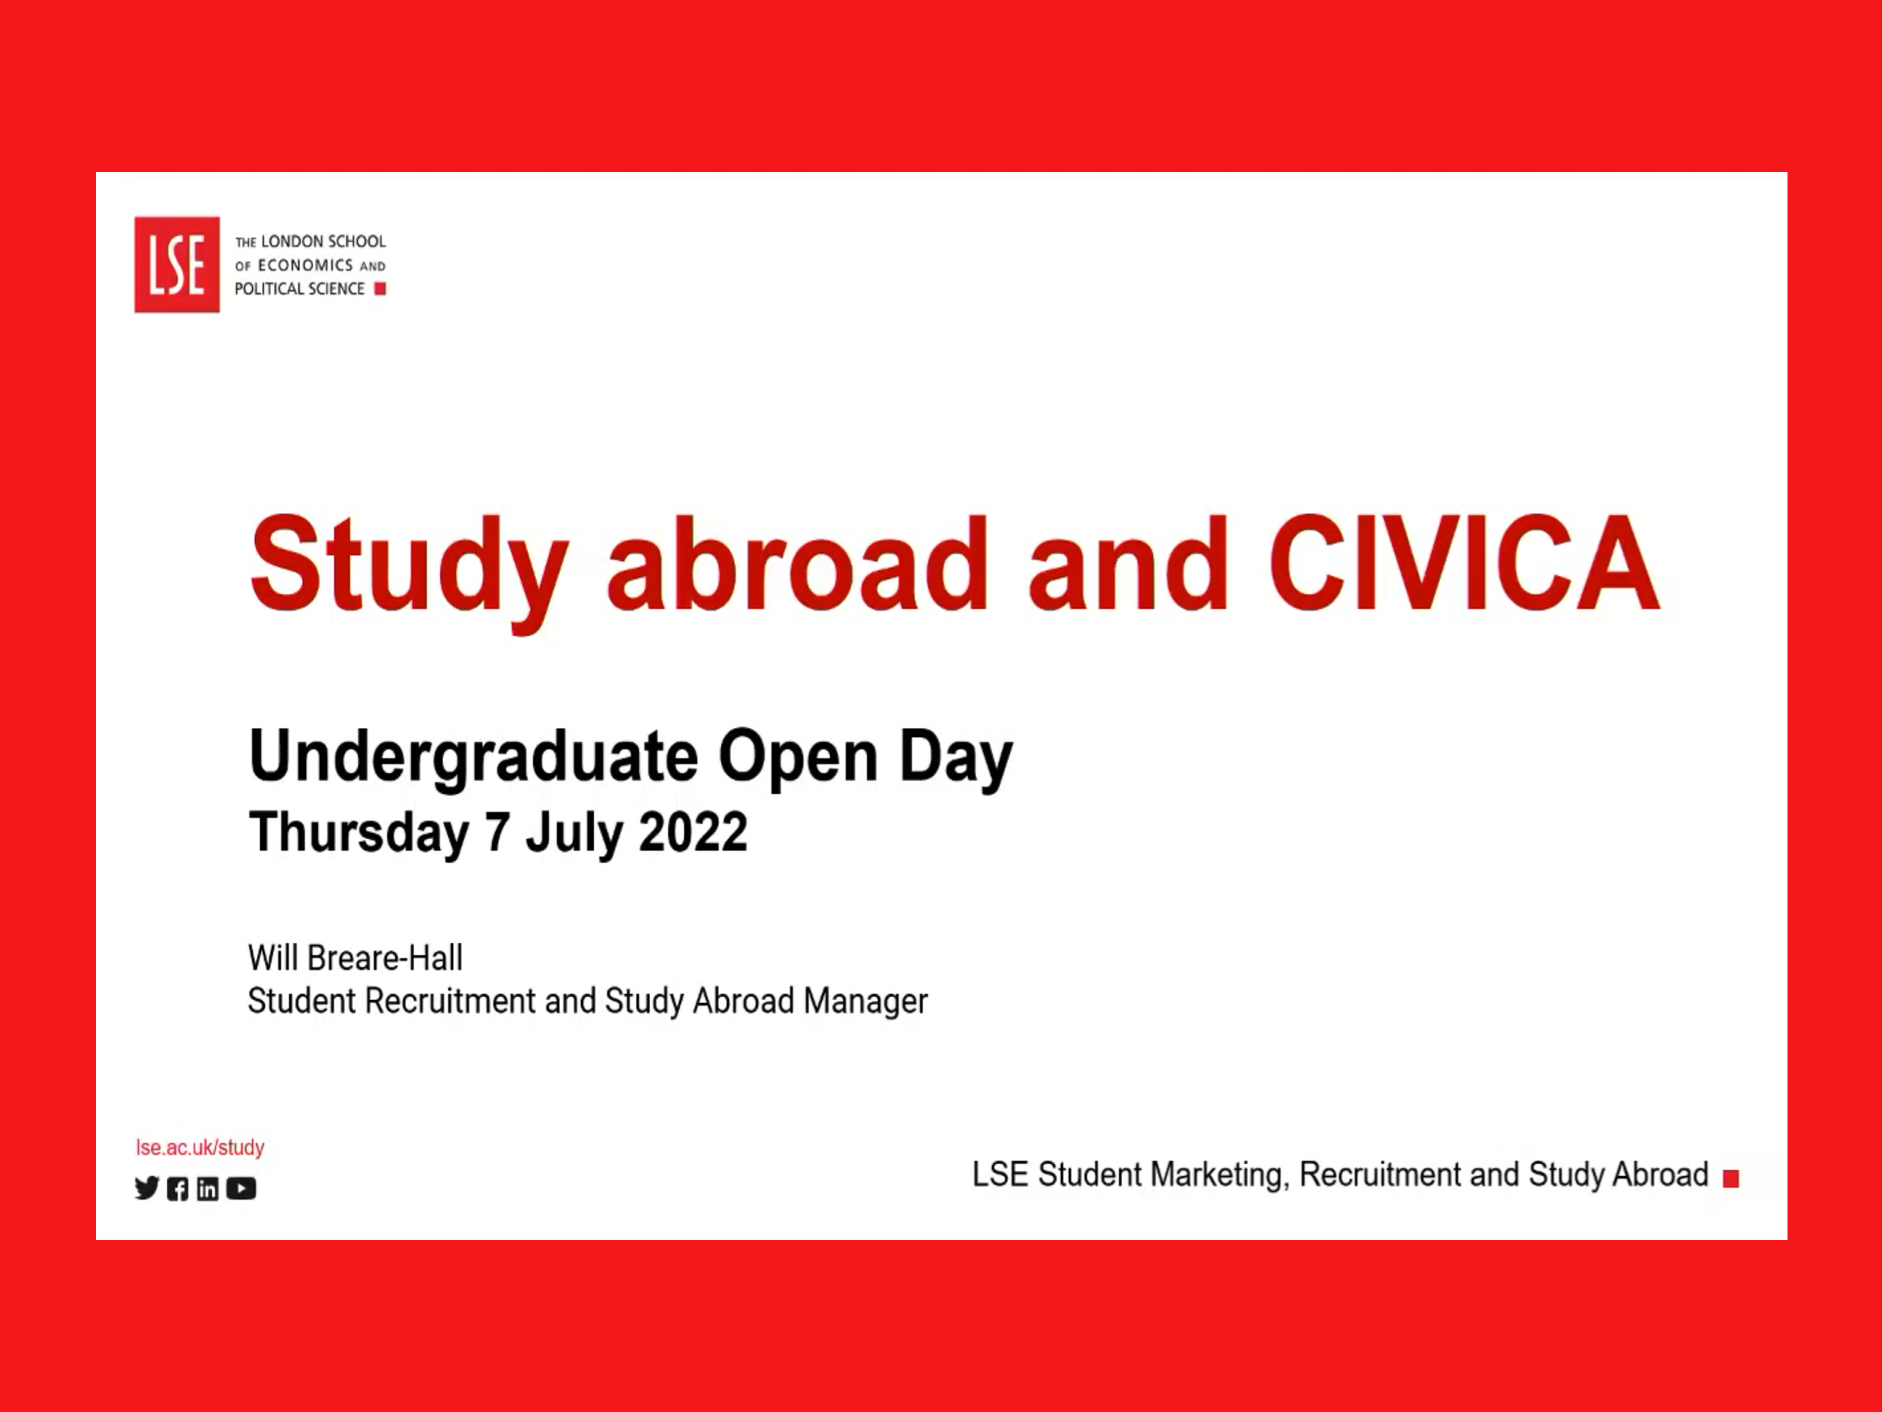 Study Abroad and Civica